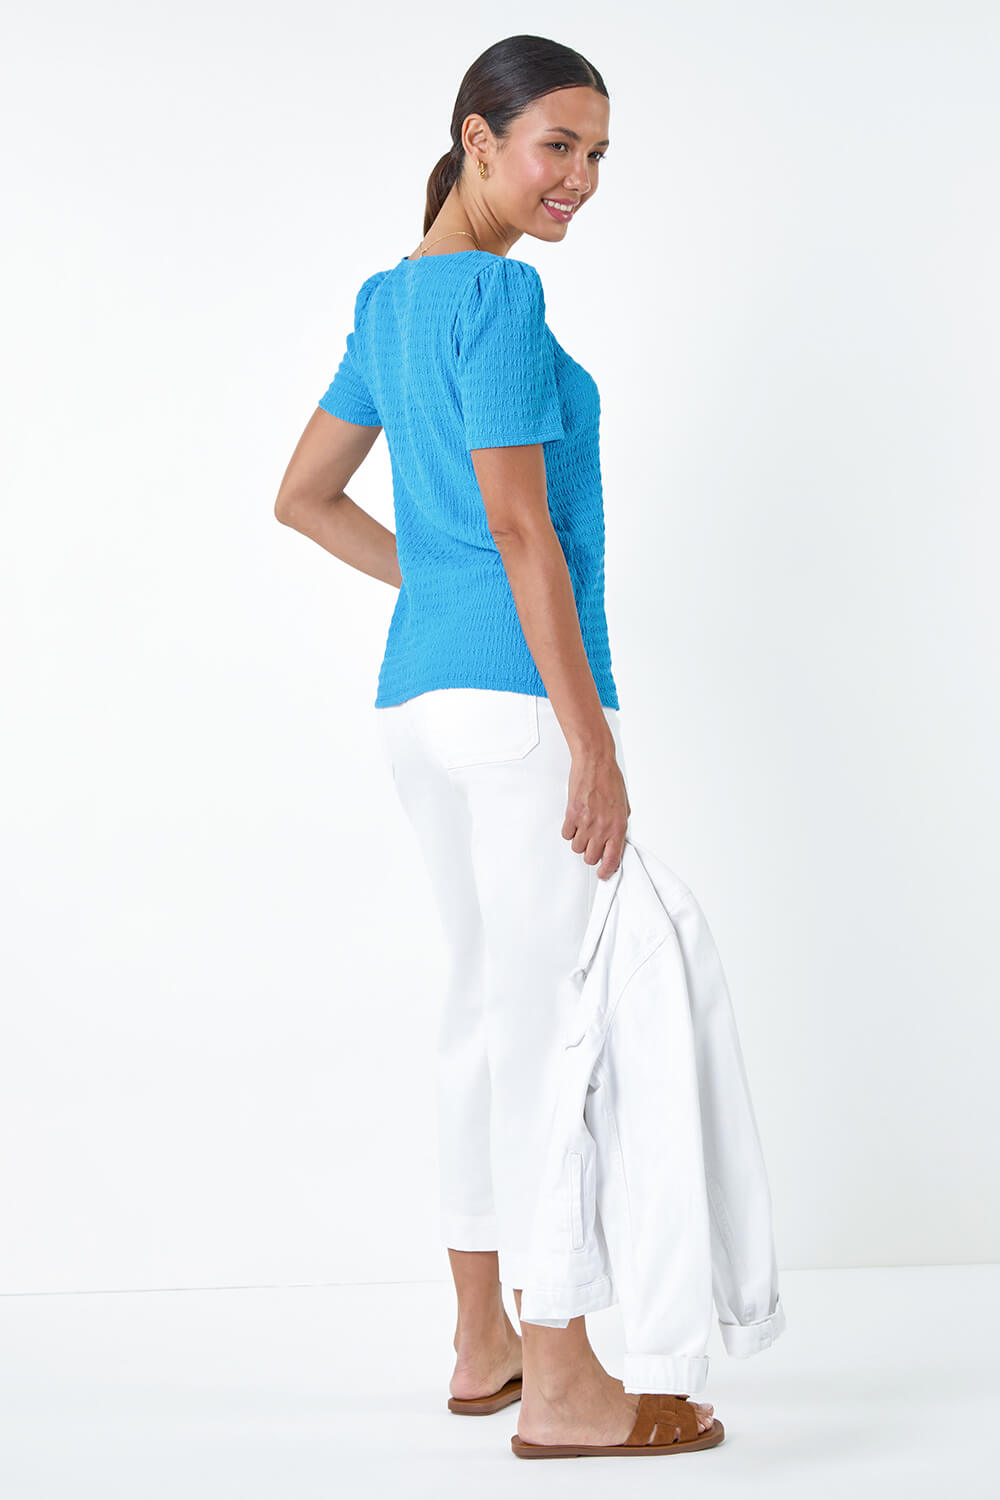 Turquoise Textured Square Neck Stretch Top, Image 3 of 5